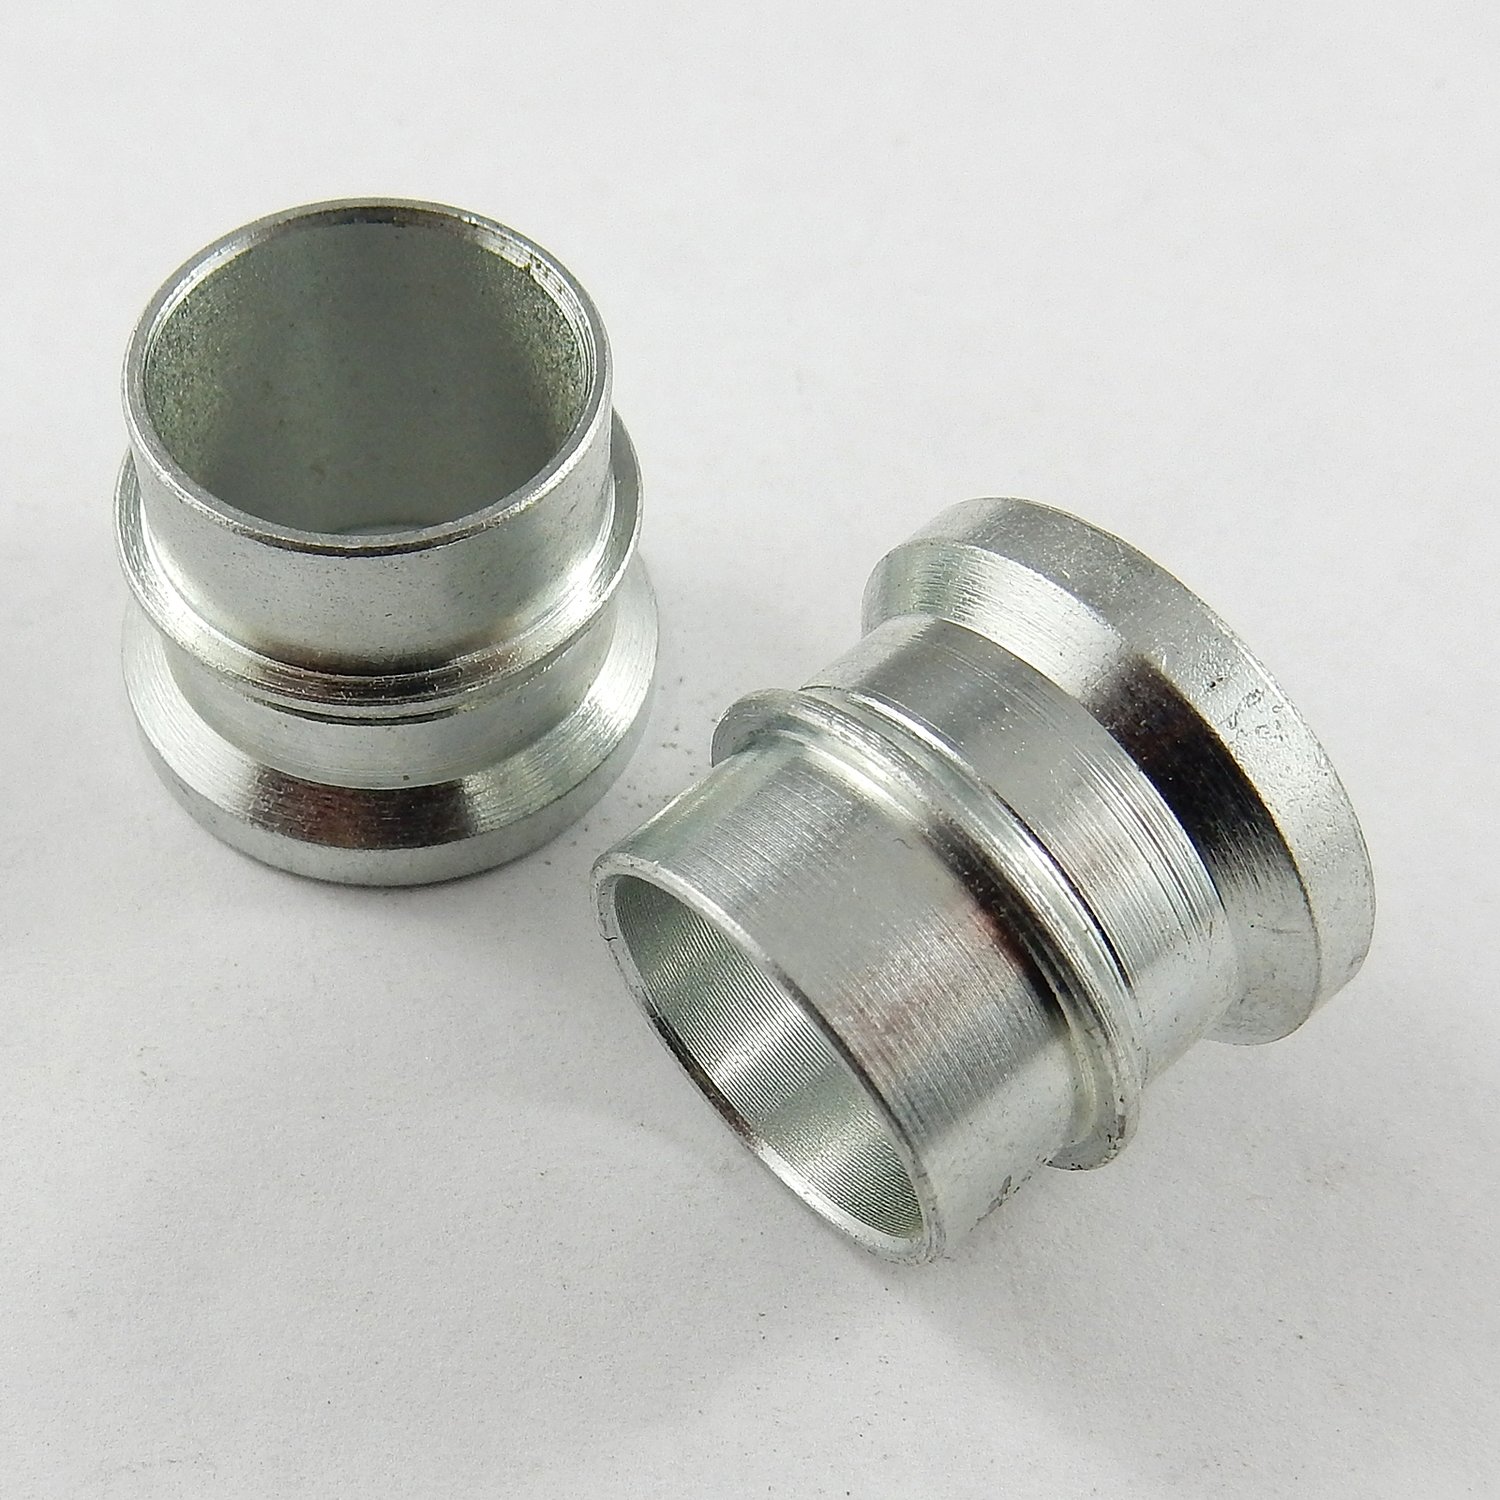 M16 to M14 Rod End Misalignment Spacers - Pair